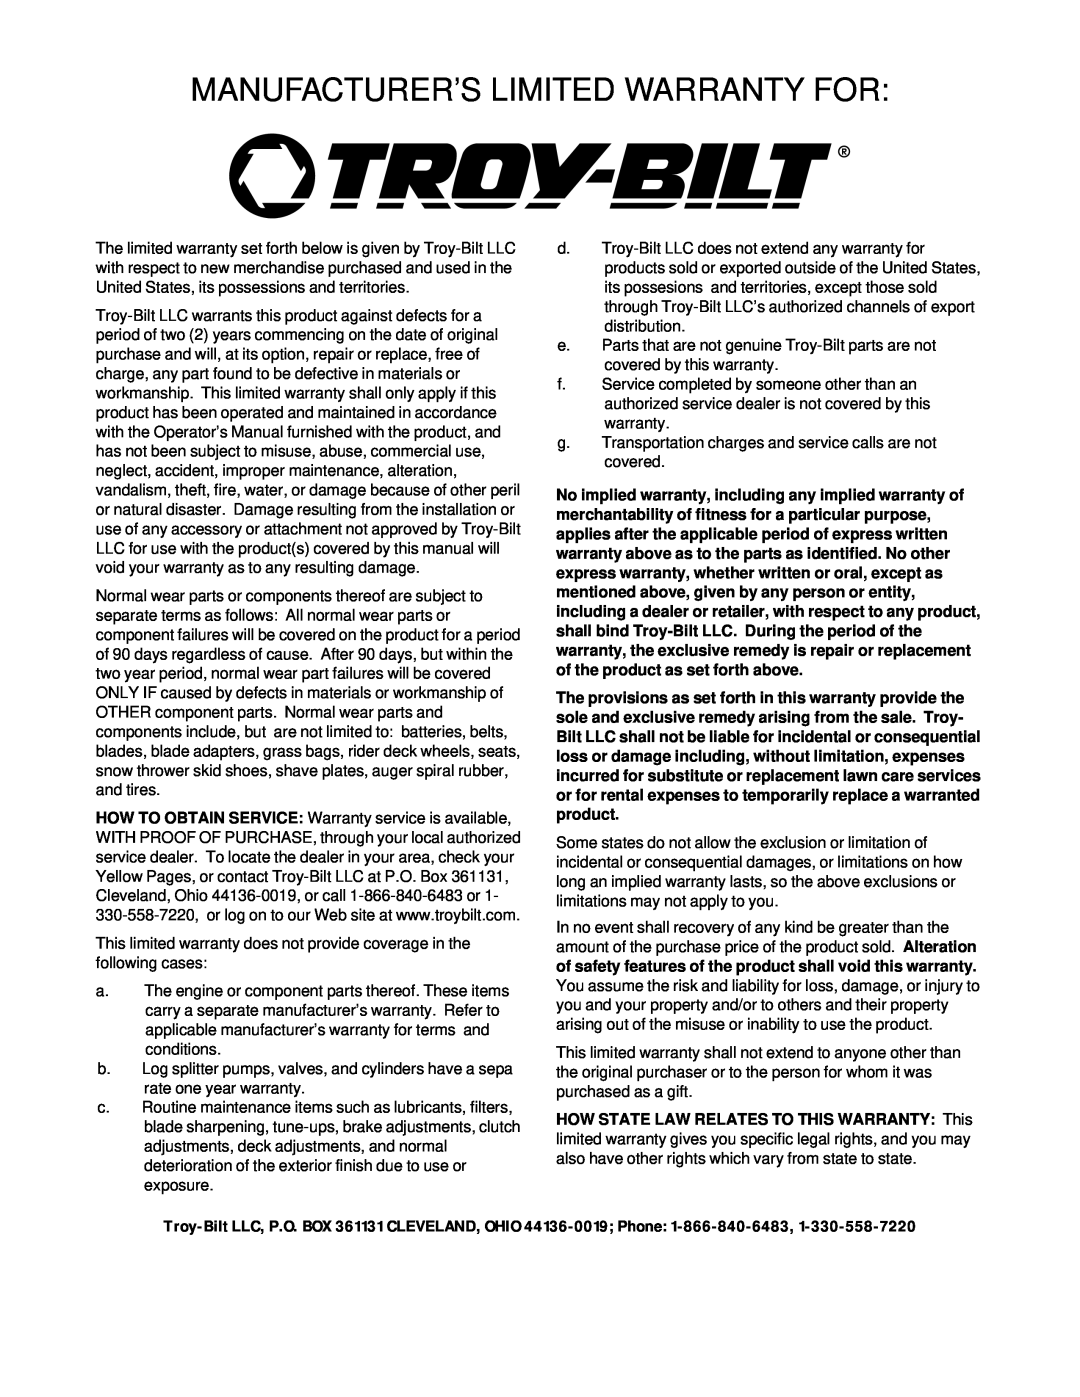 Briggs & Stratton 592 manual Manufacturer’S Limited Warranty For, HOW STATE LAW RELATES TO THIS WARRANTY This 